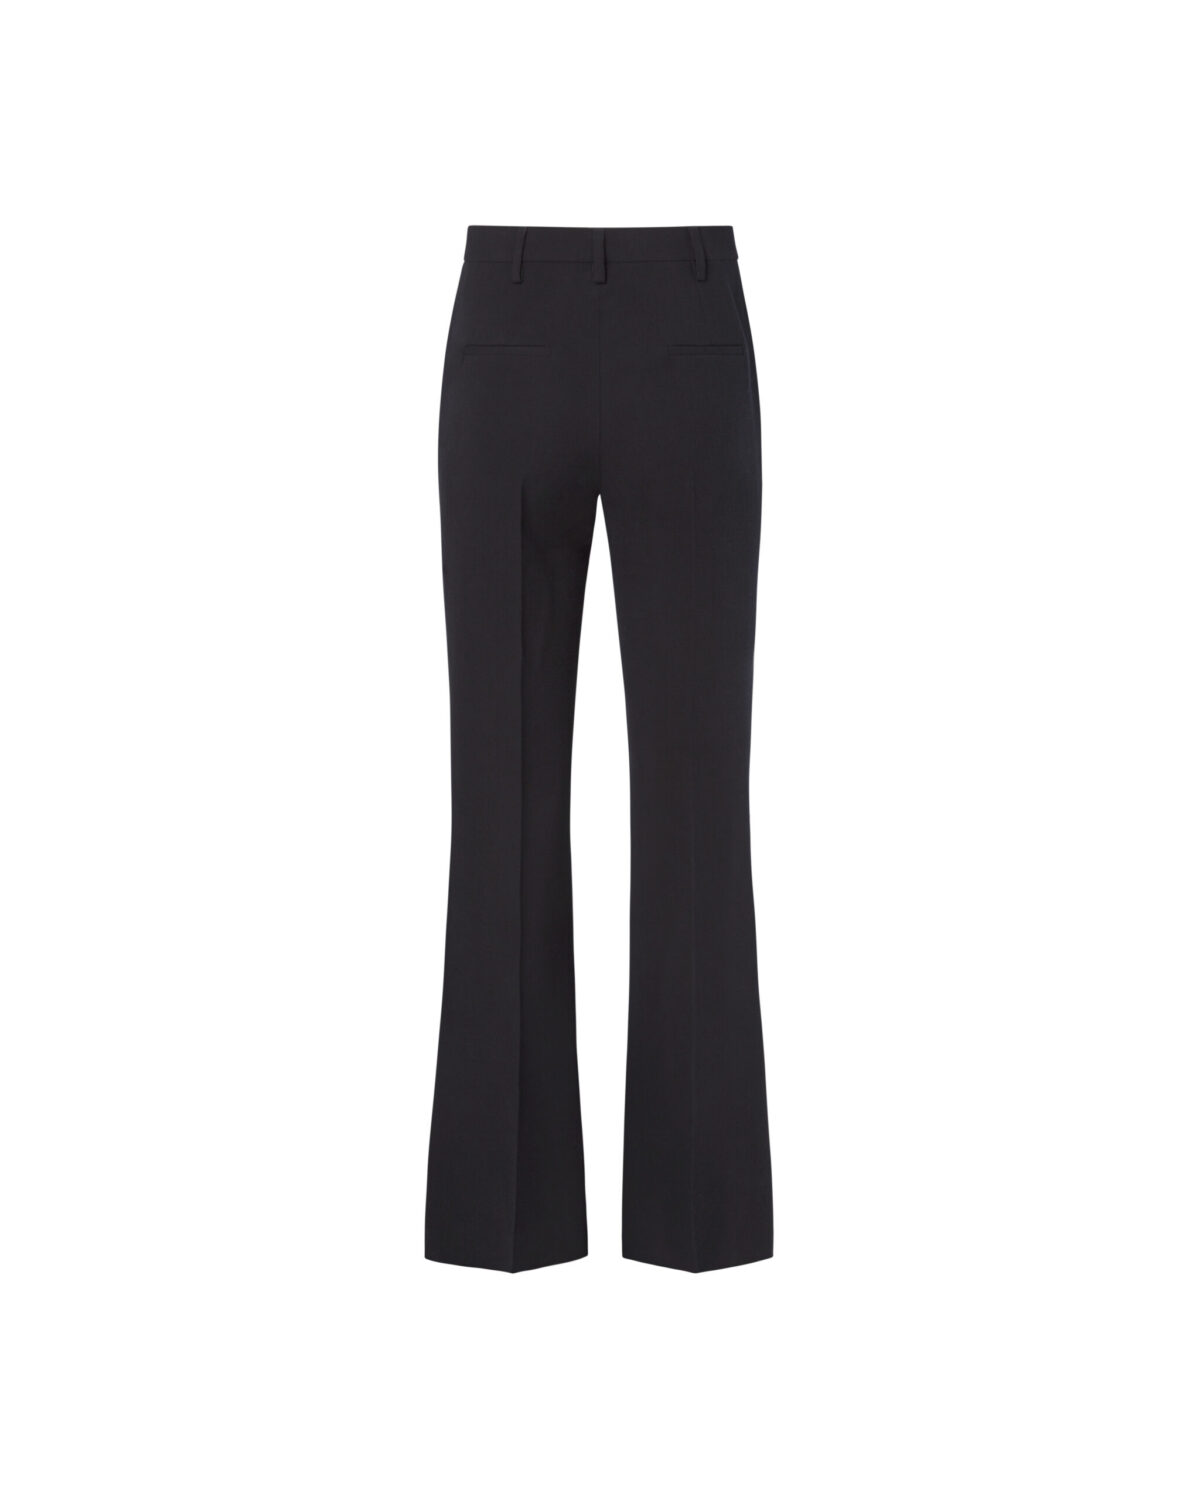 Suss Flare Trousers